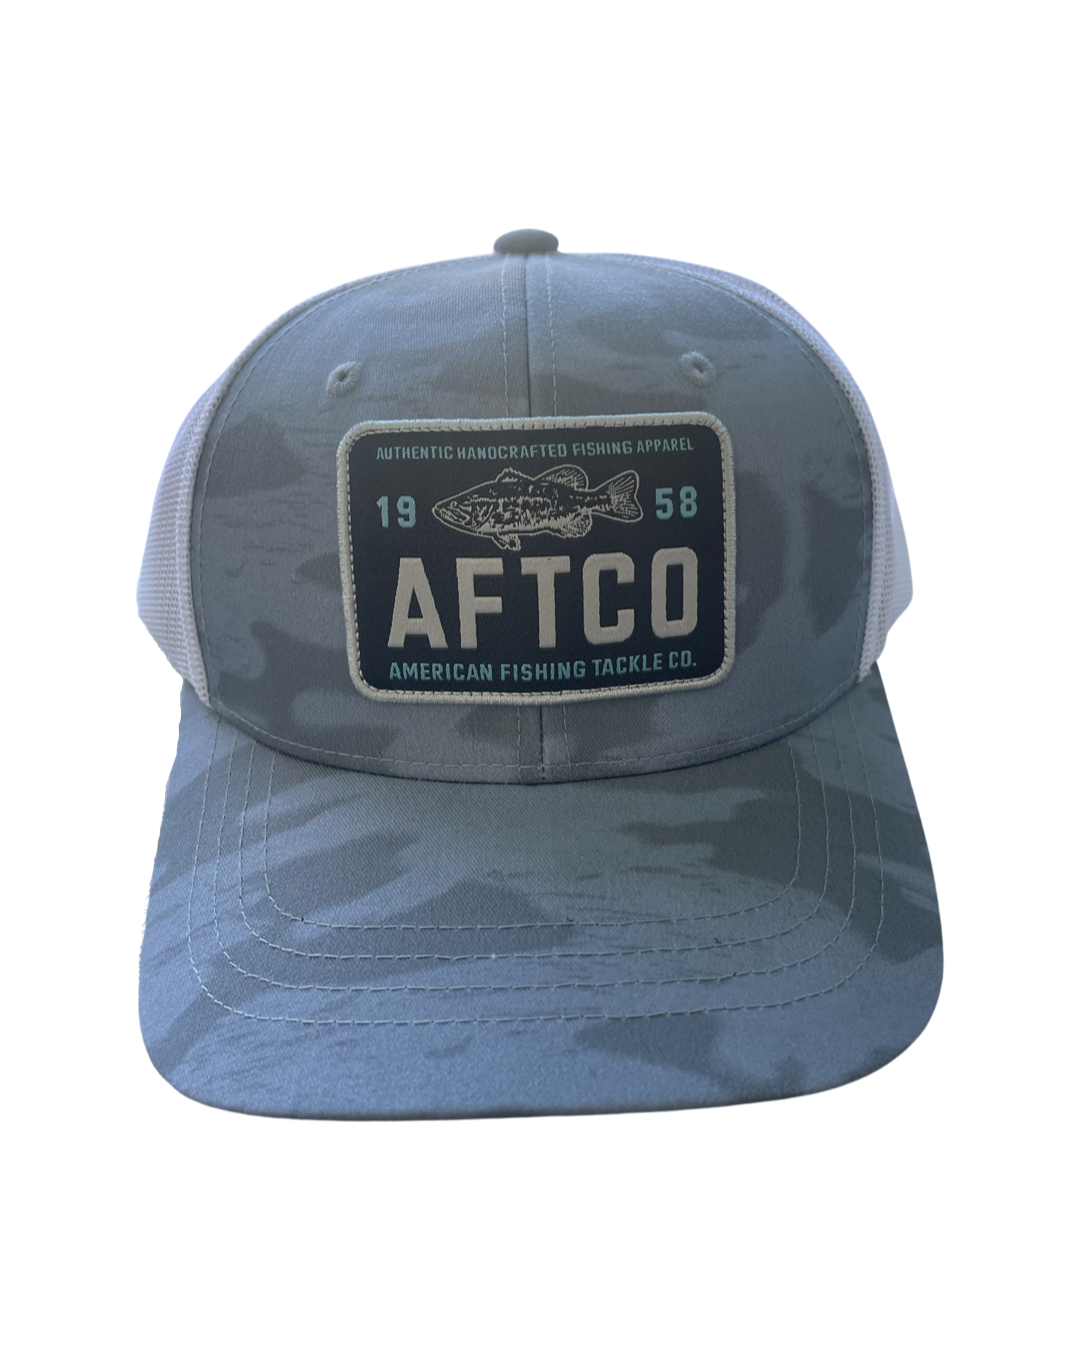 Aftco Guided Trucker